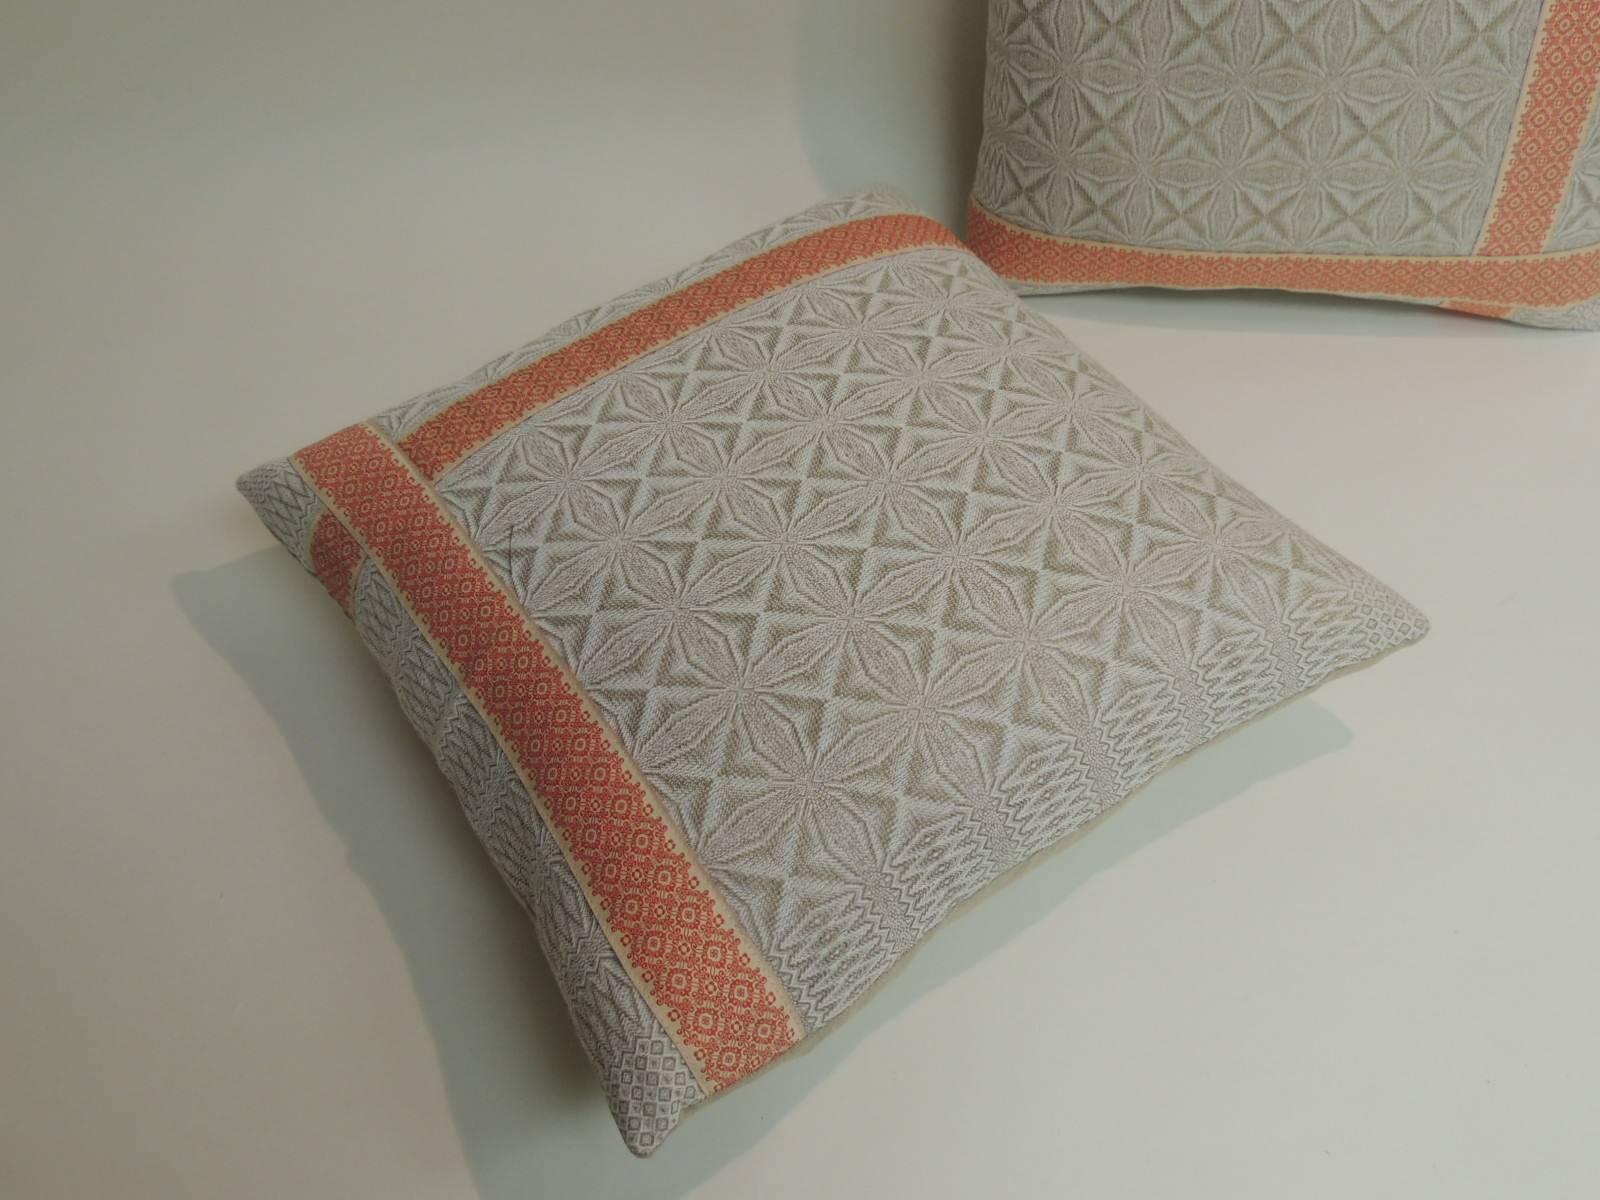 Aesthetic Movement Pair of Vintage Woven Swedish Decorative Pillows with Ribbon Accents For Sale